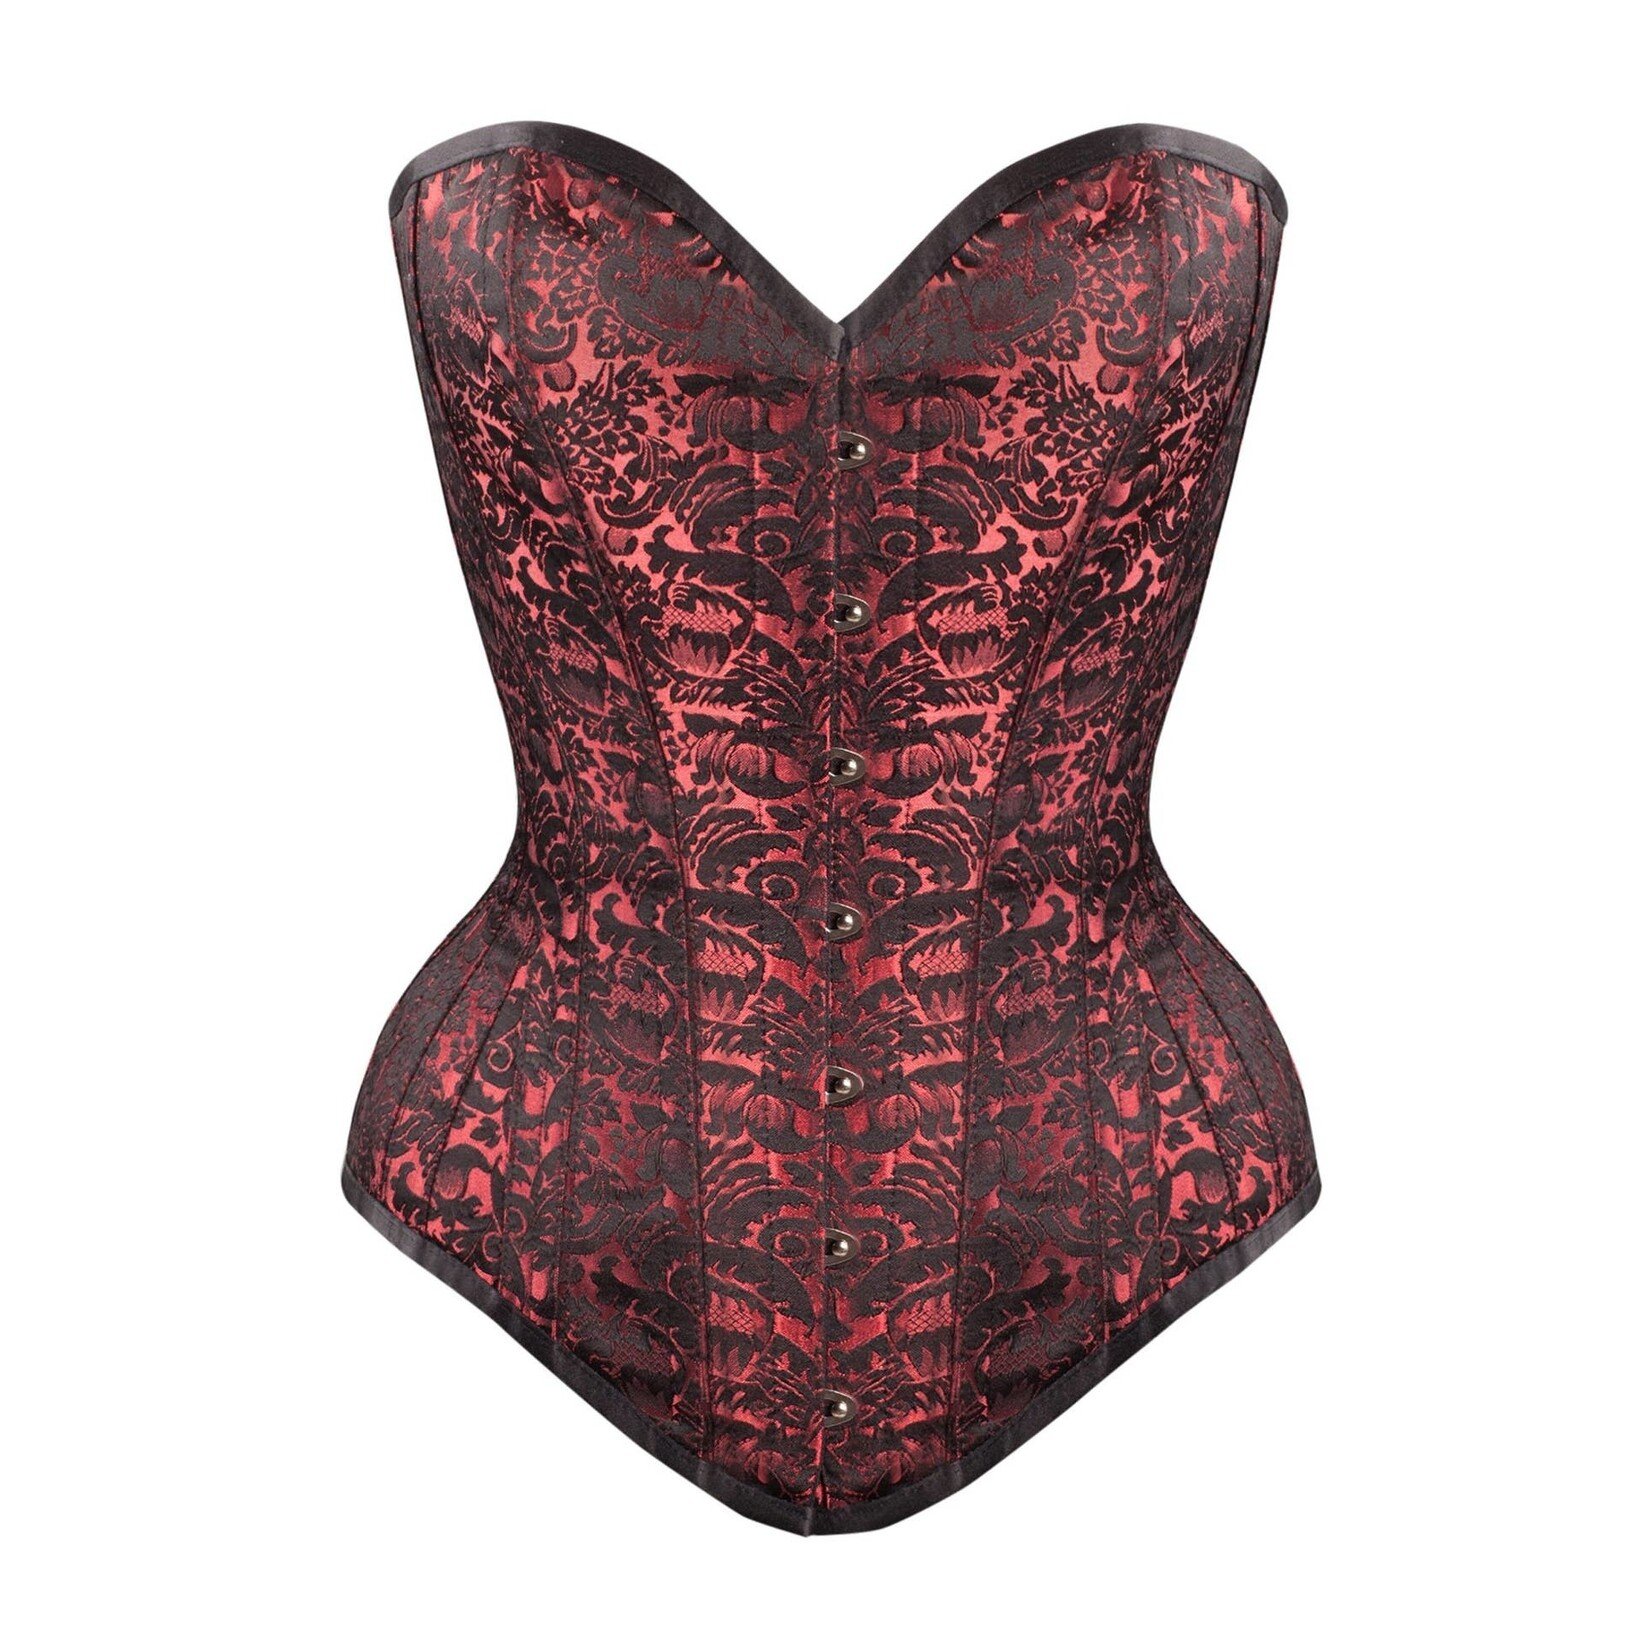 Corset Story Red LL Brocade Corset w/ Hip Gores 40in/43-44in